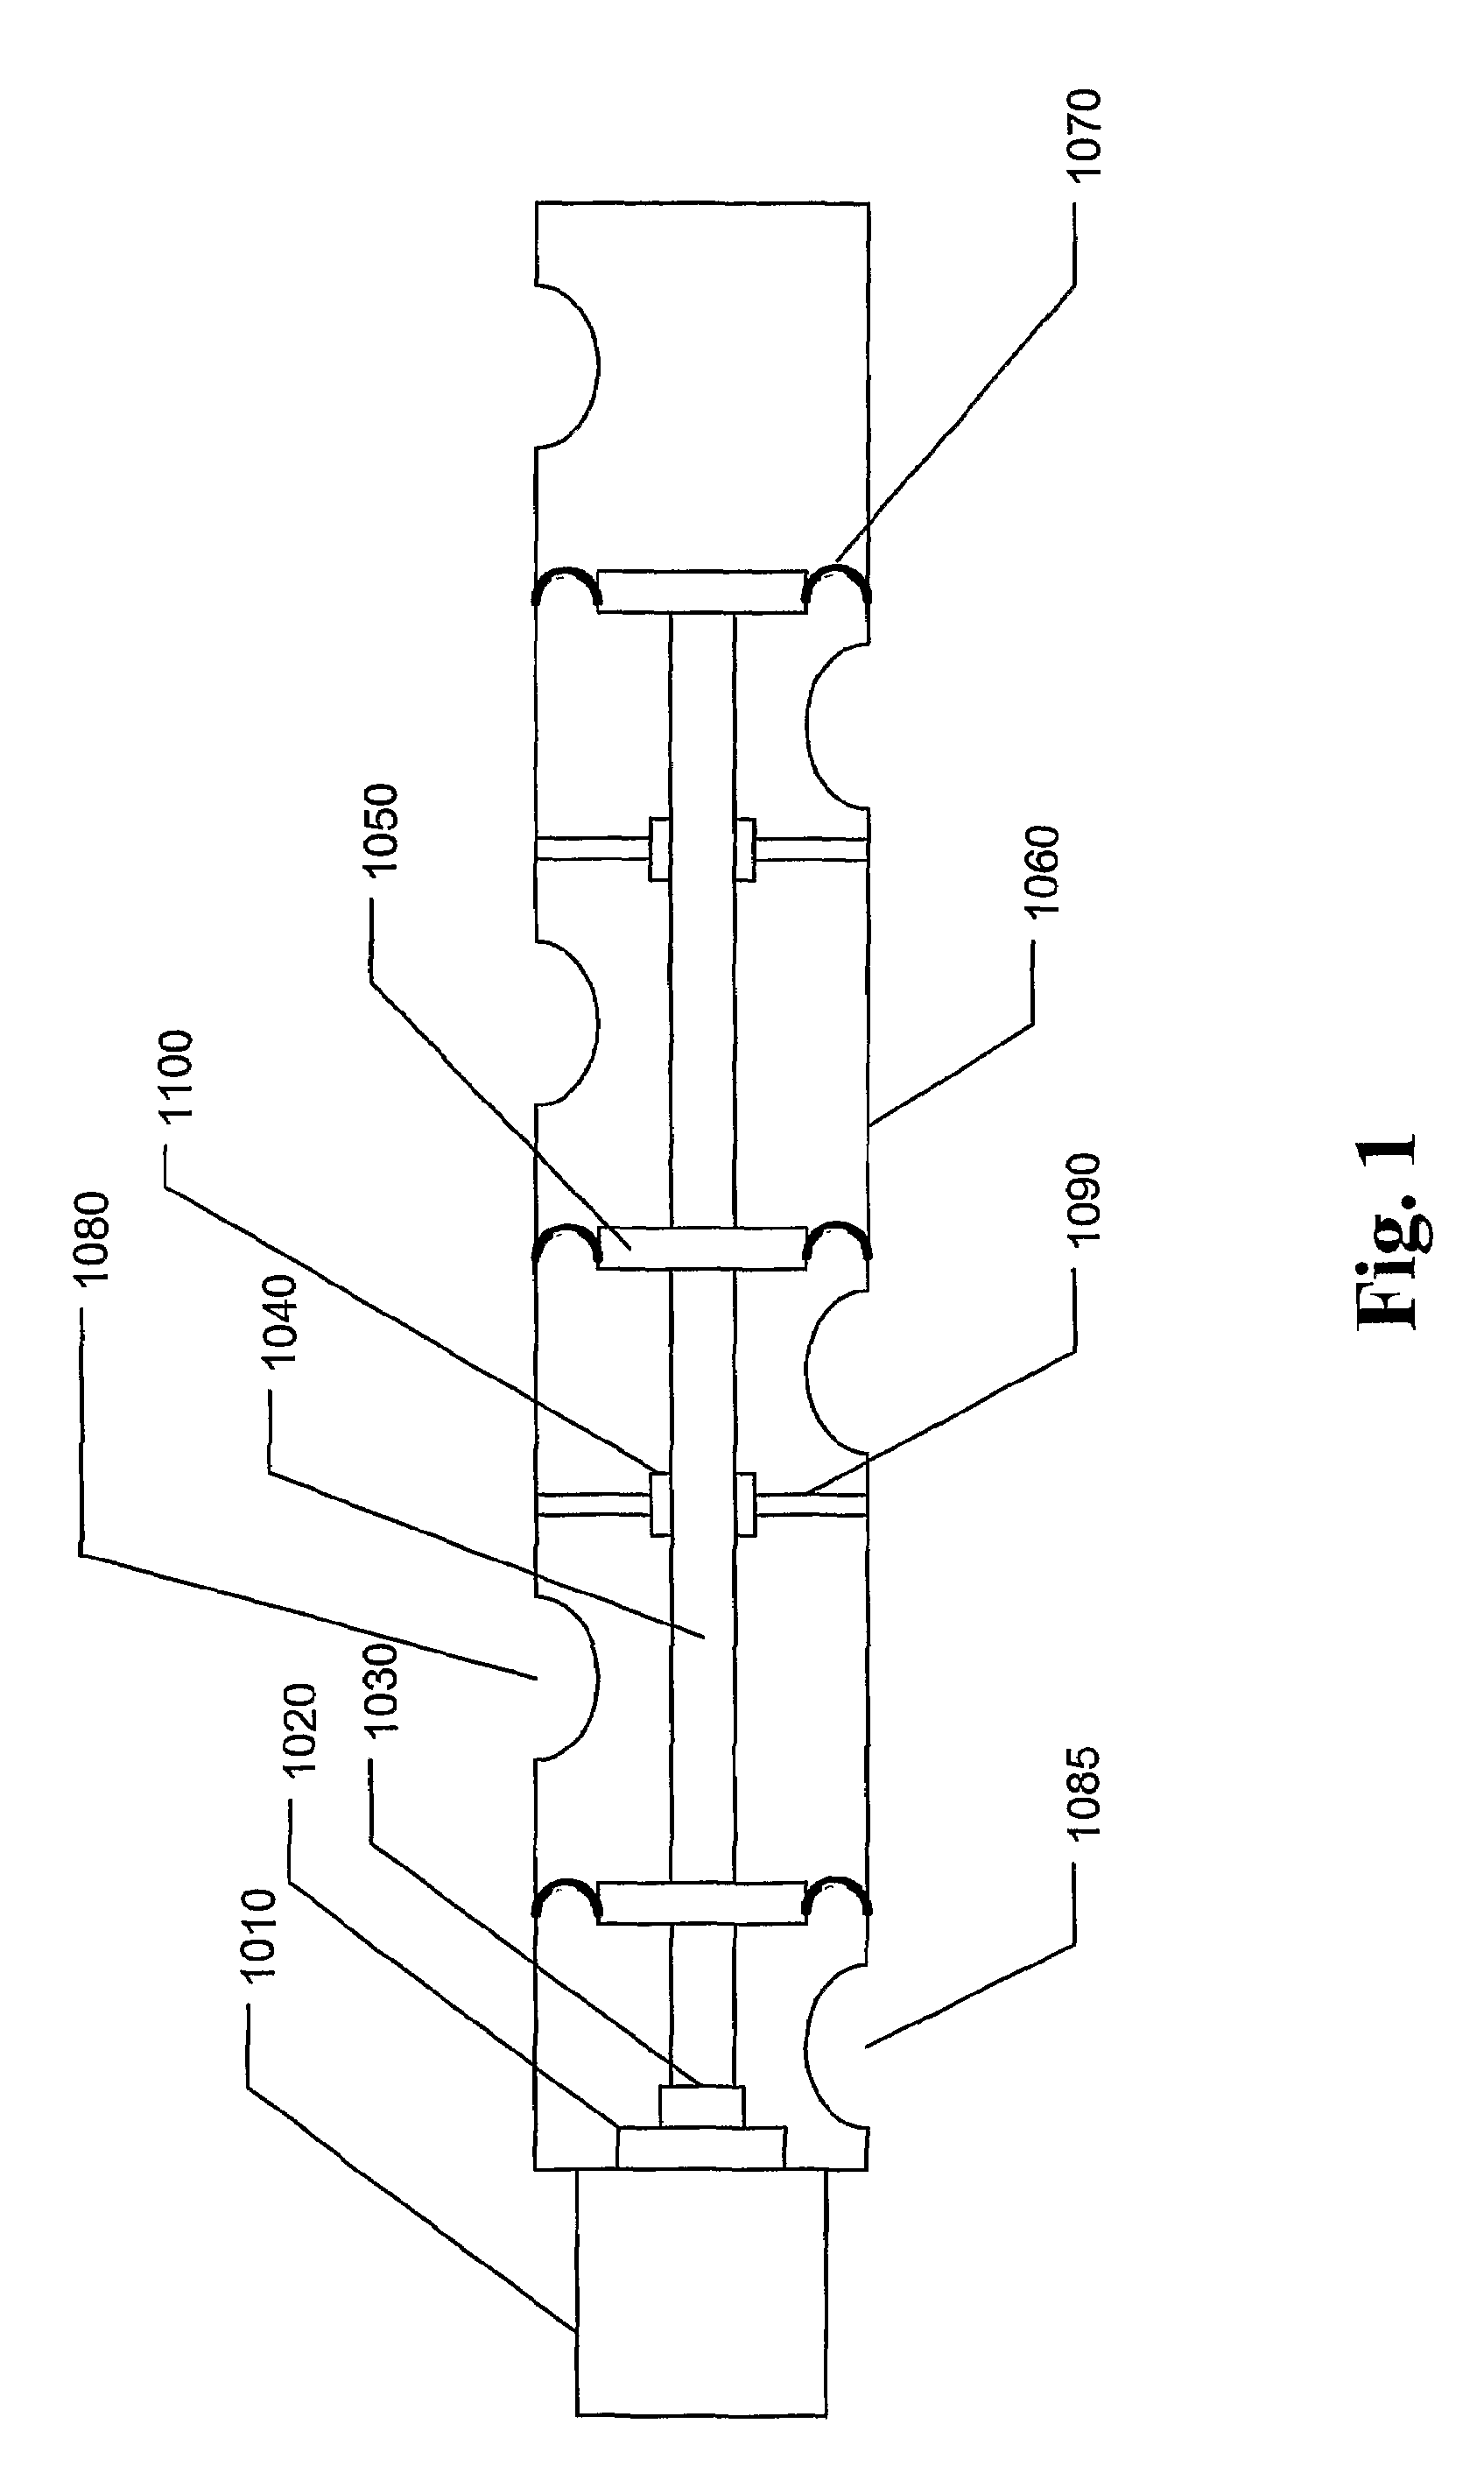 Acoustic transducer comprising a plurality of coaxially arranged diaphragms